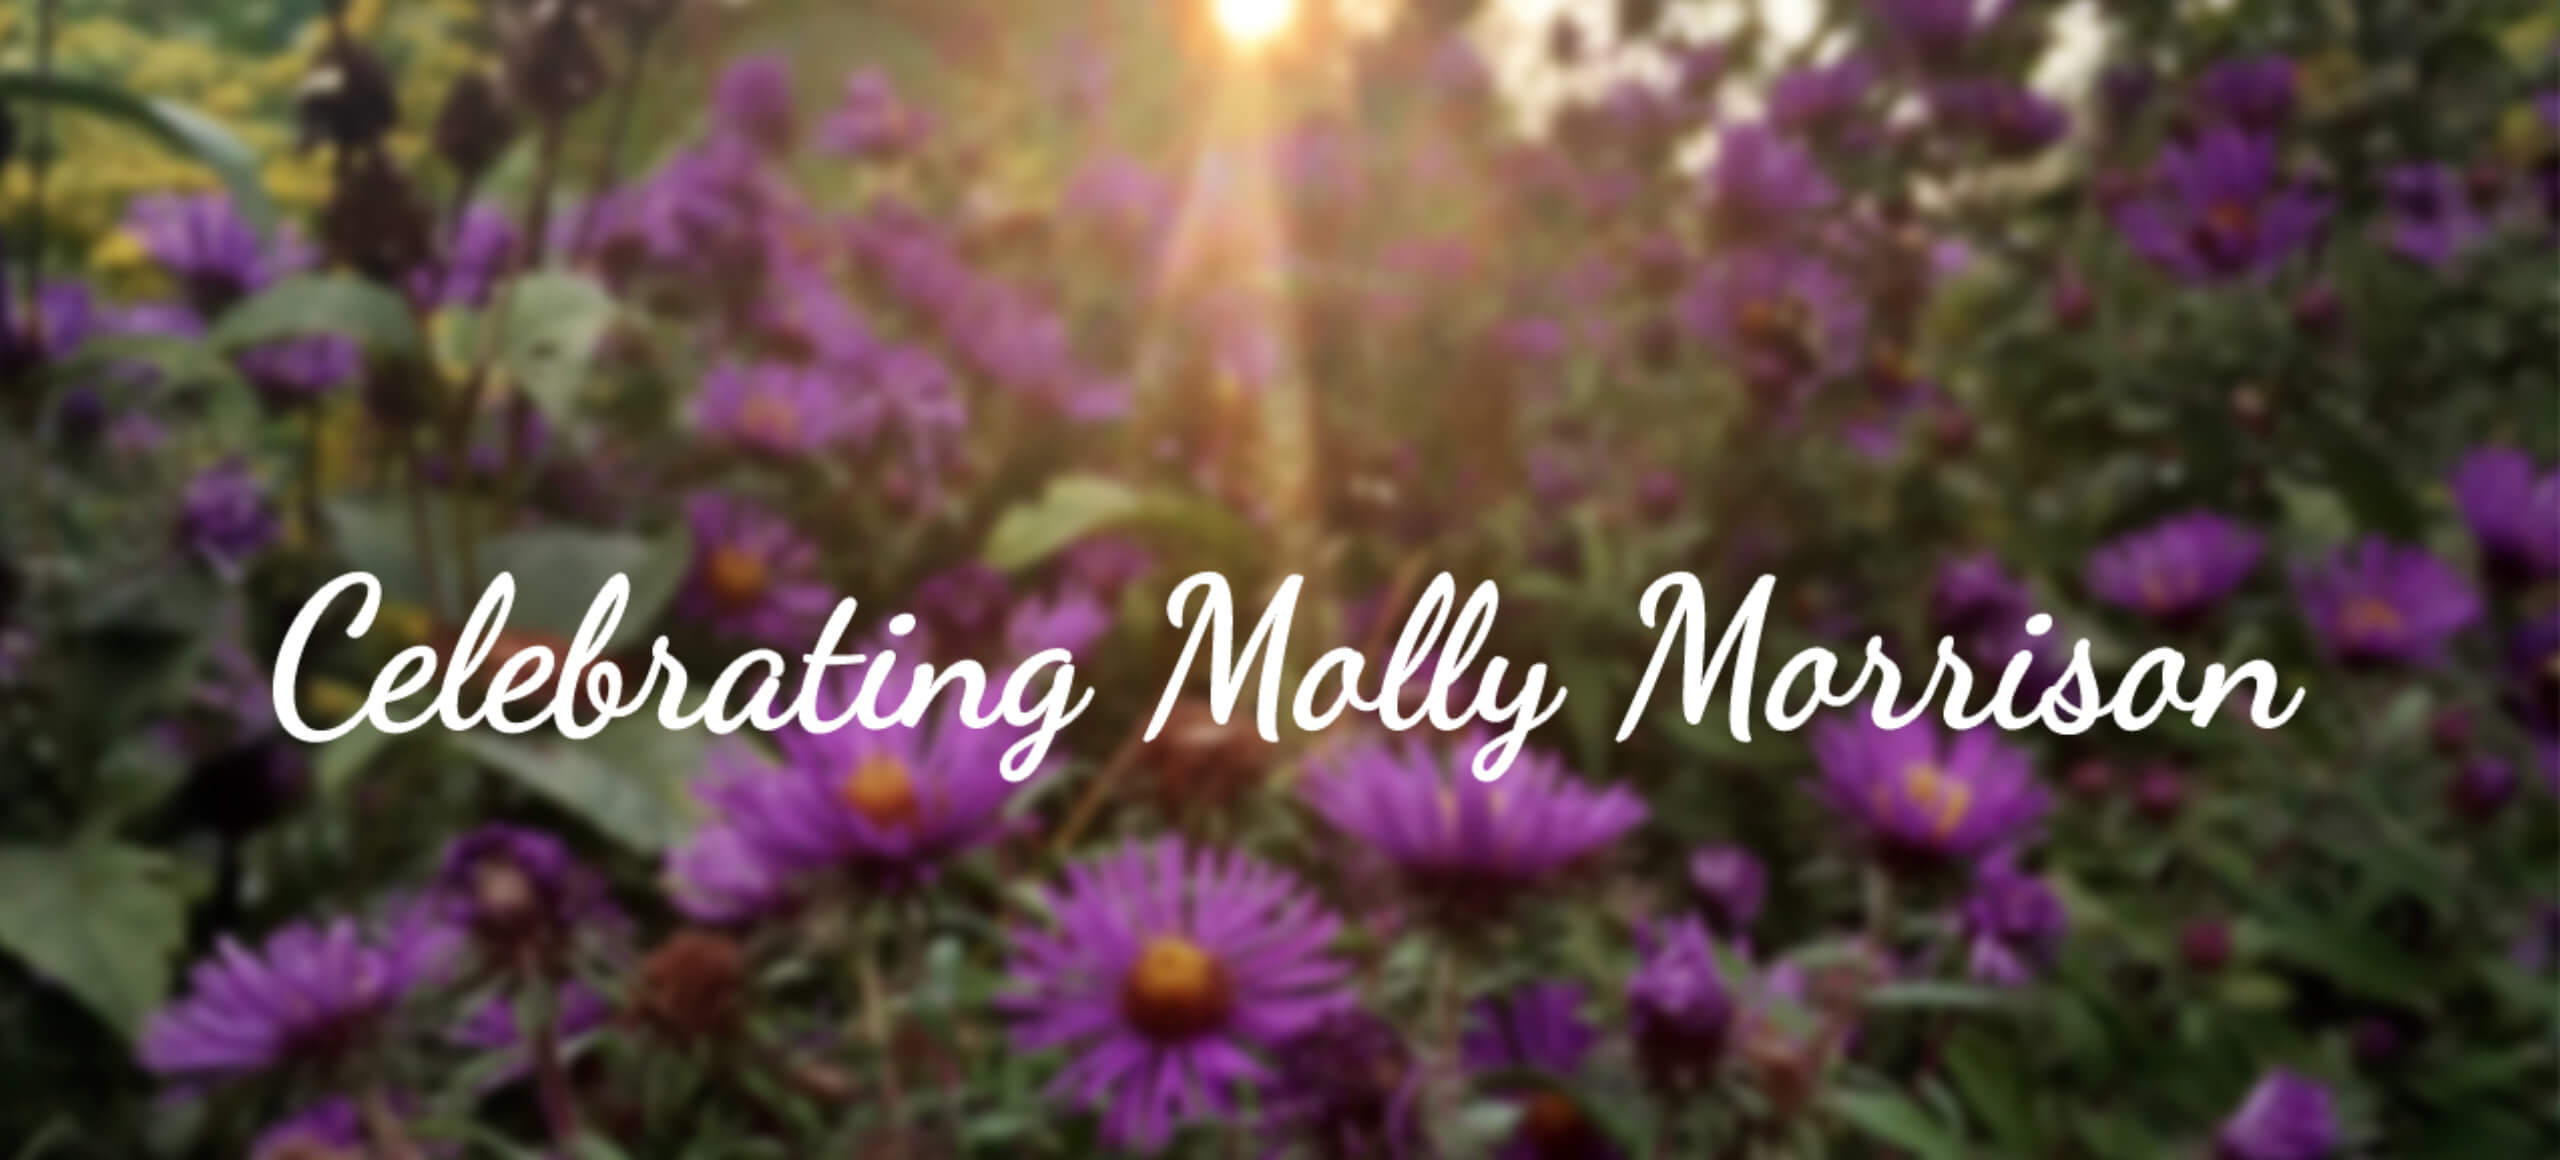 Blurred purple flowers with the white text "Celebrating Molly Morrison"